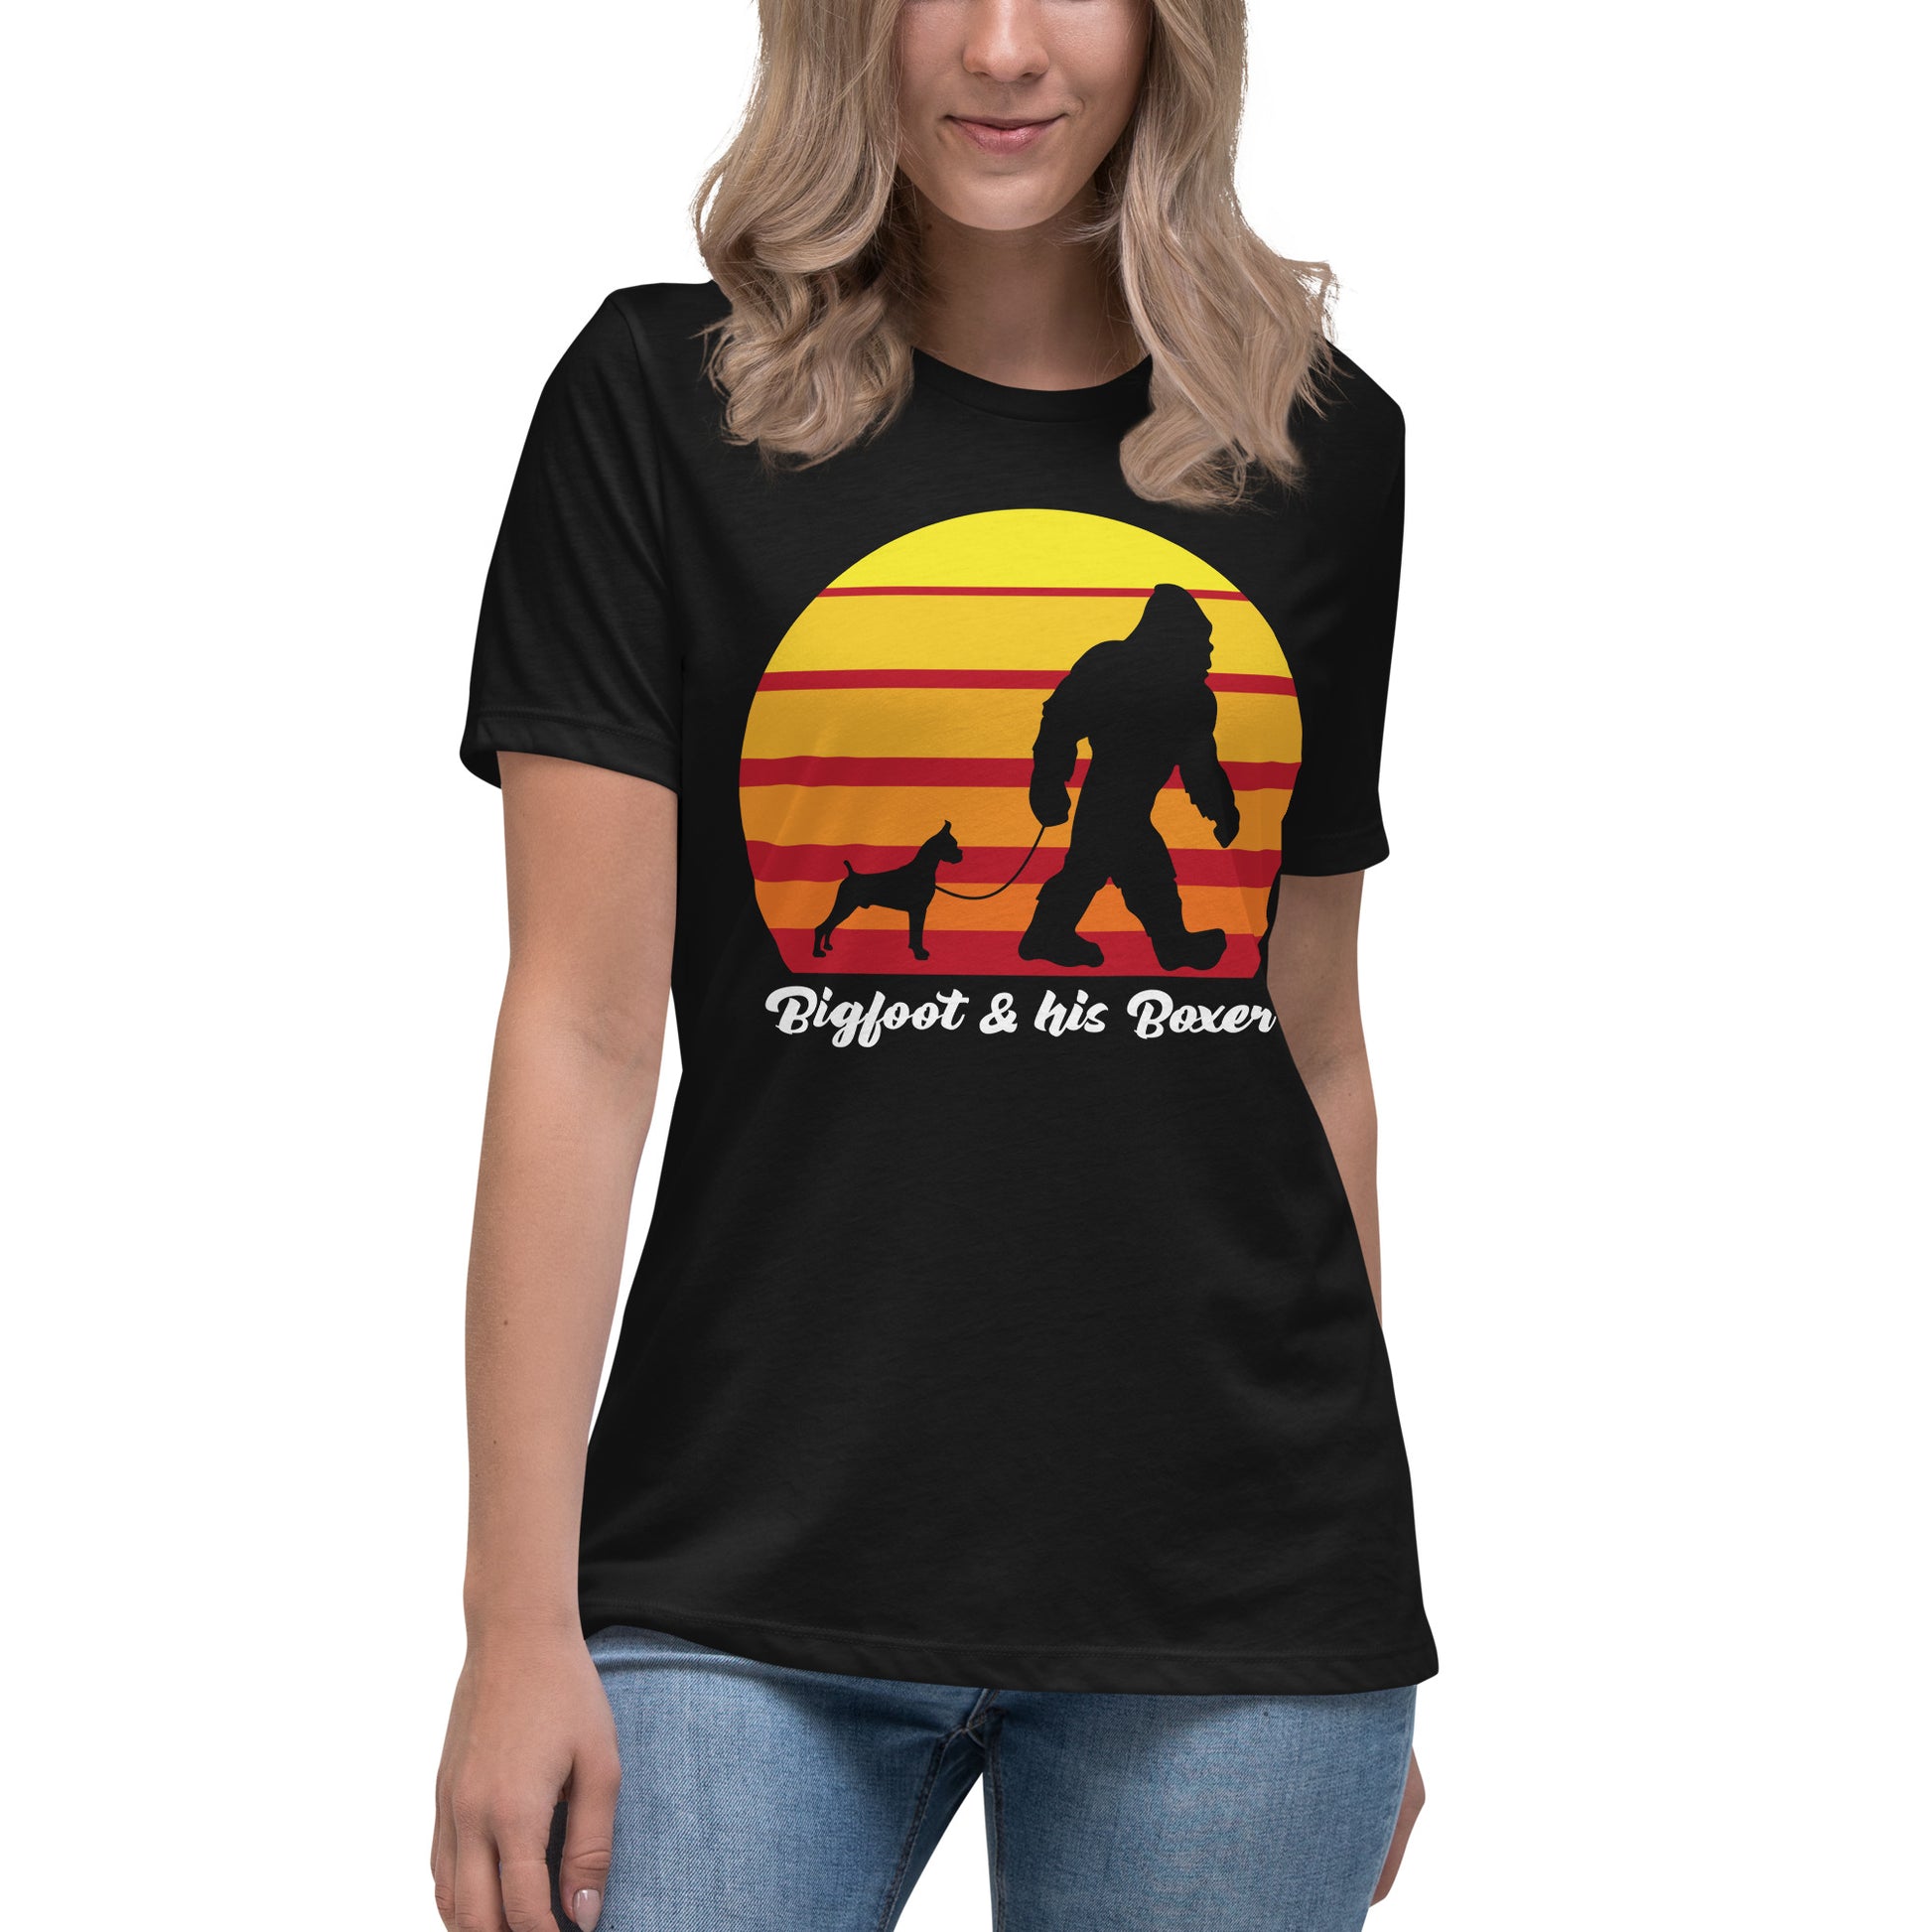 Big foot and his Boxer women’s black t-shirt by Dog Artistry.